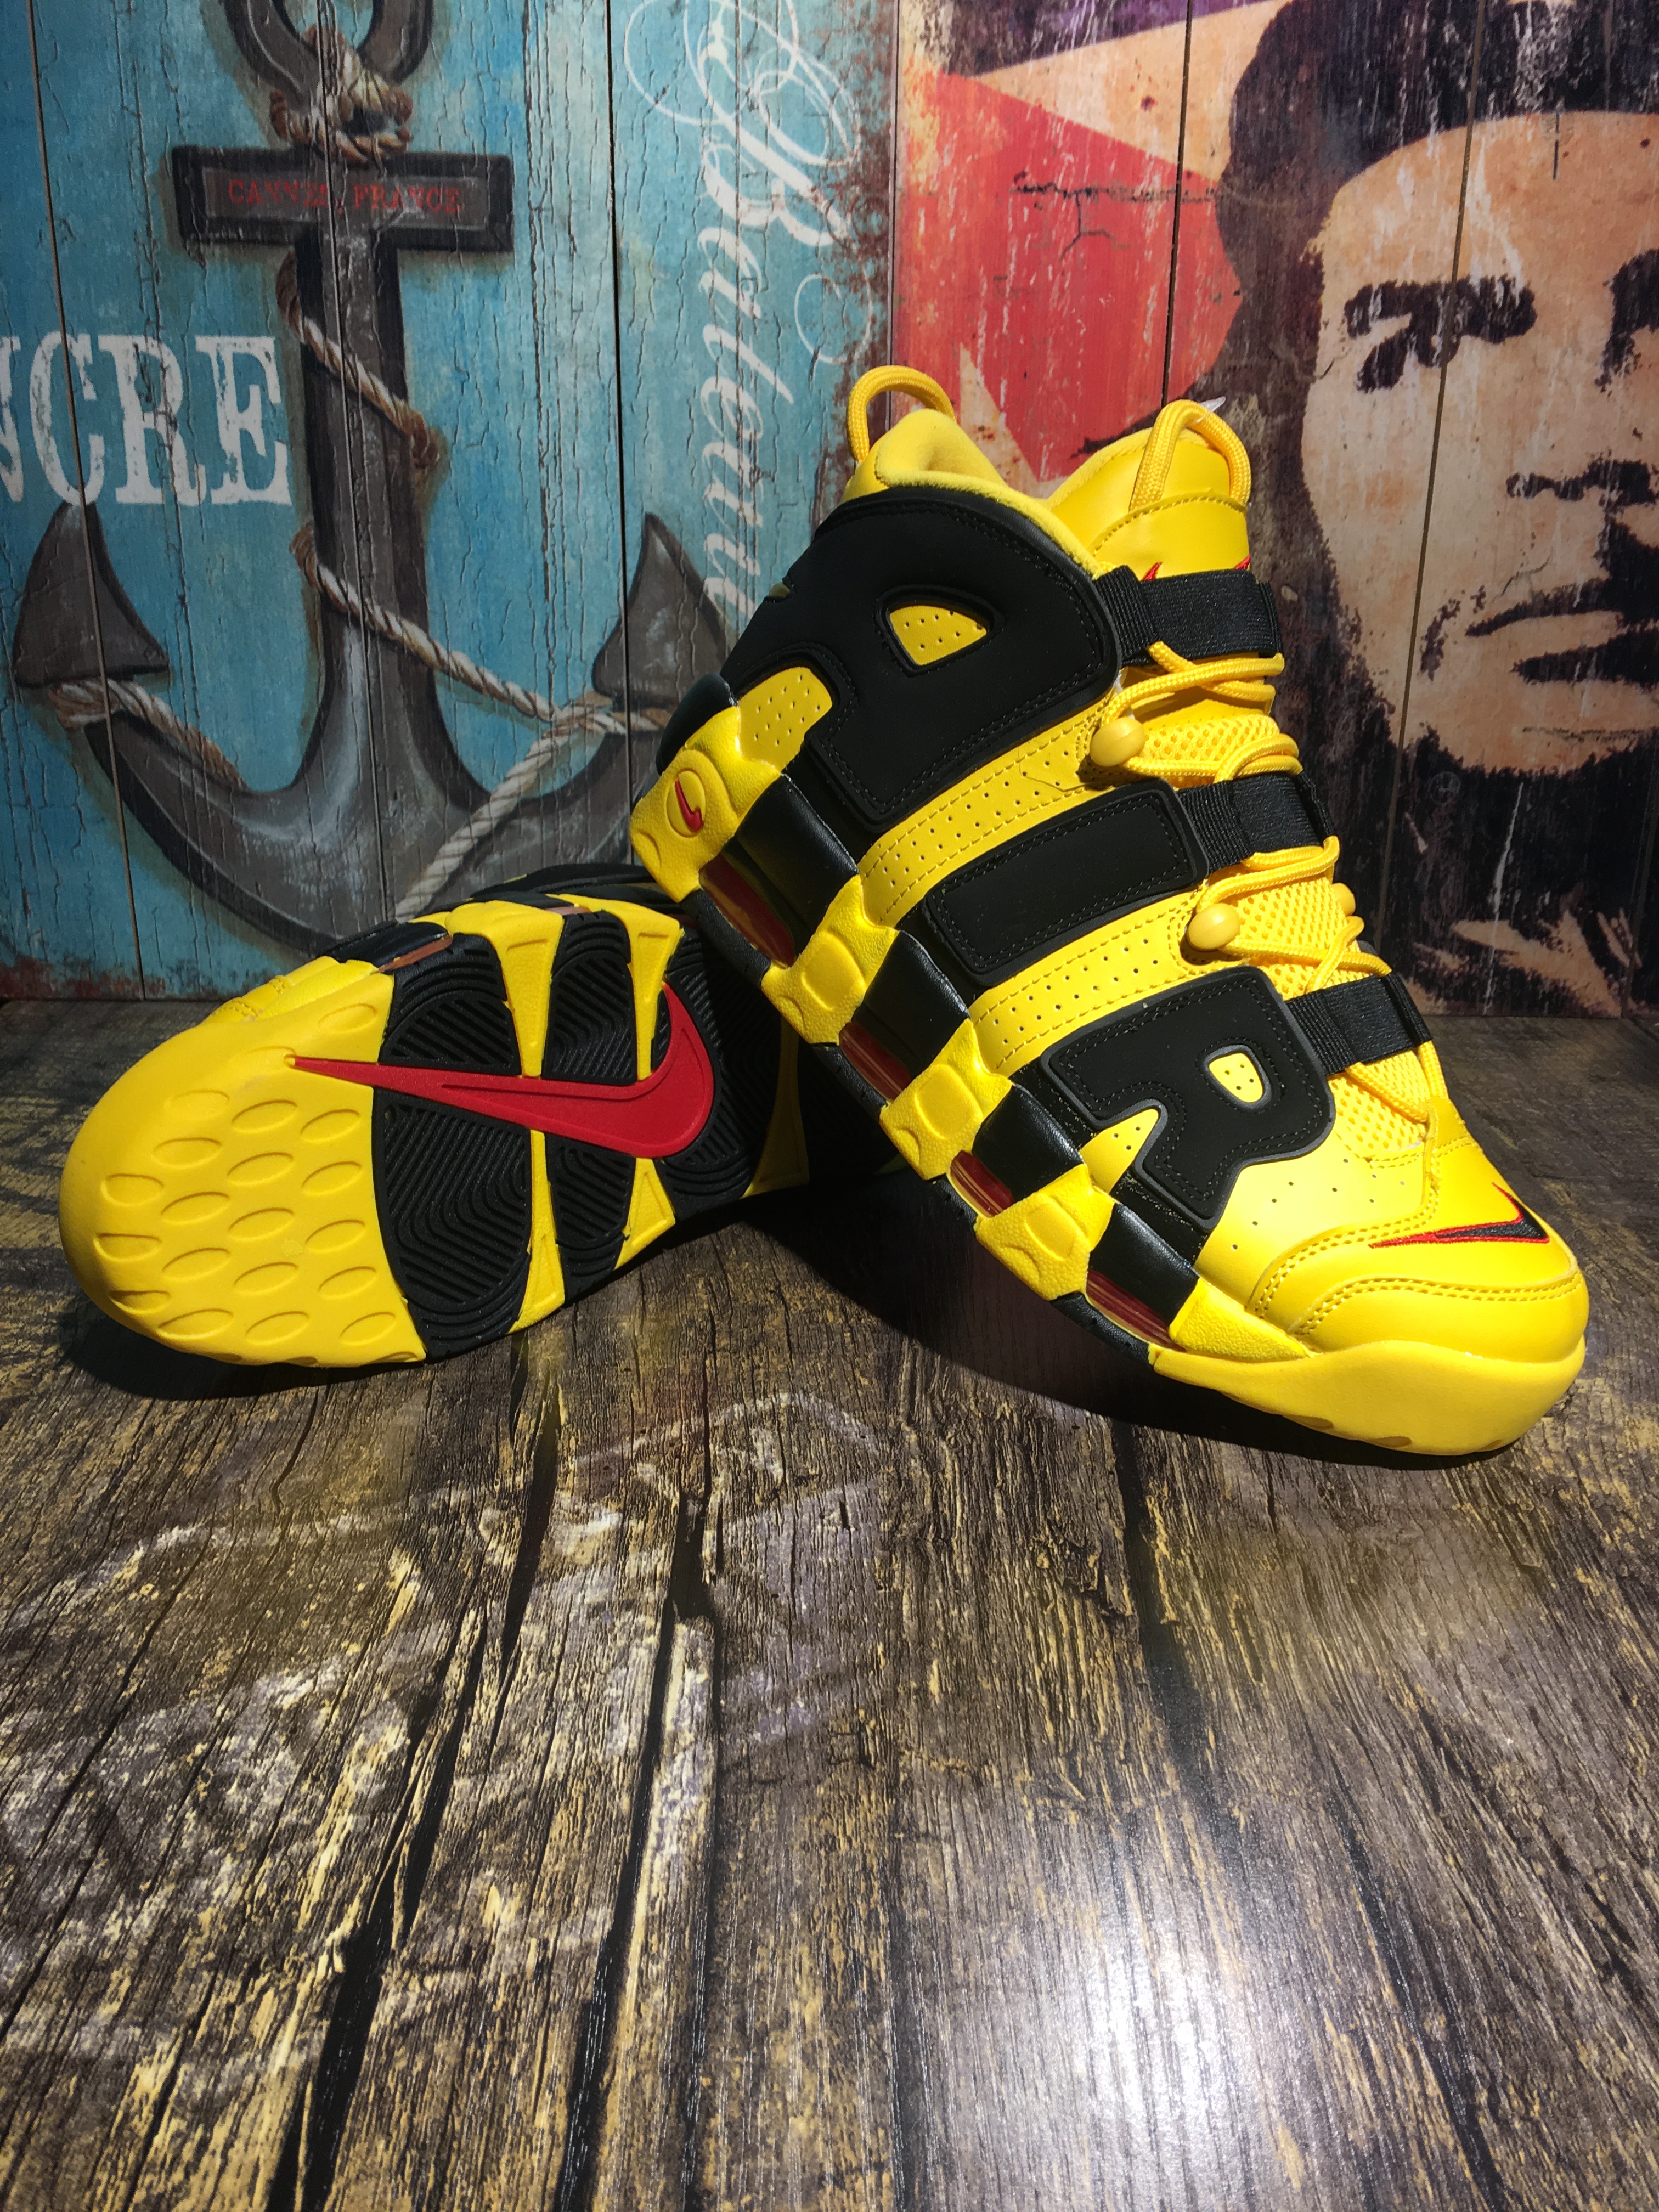 Nike Air Uptempo Yellow Black Shoes - Click Image to Close